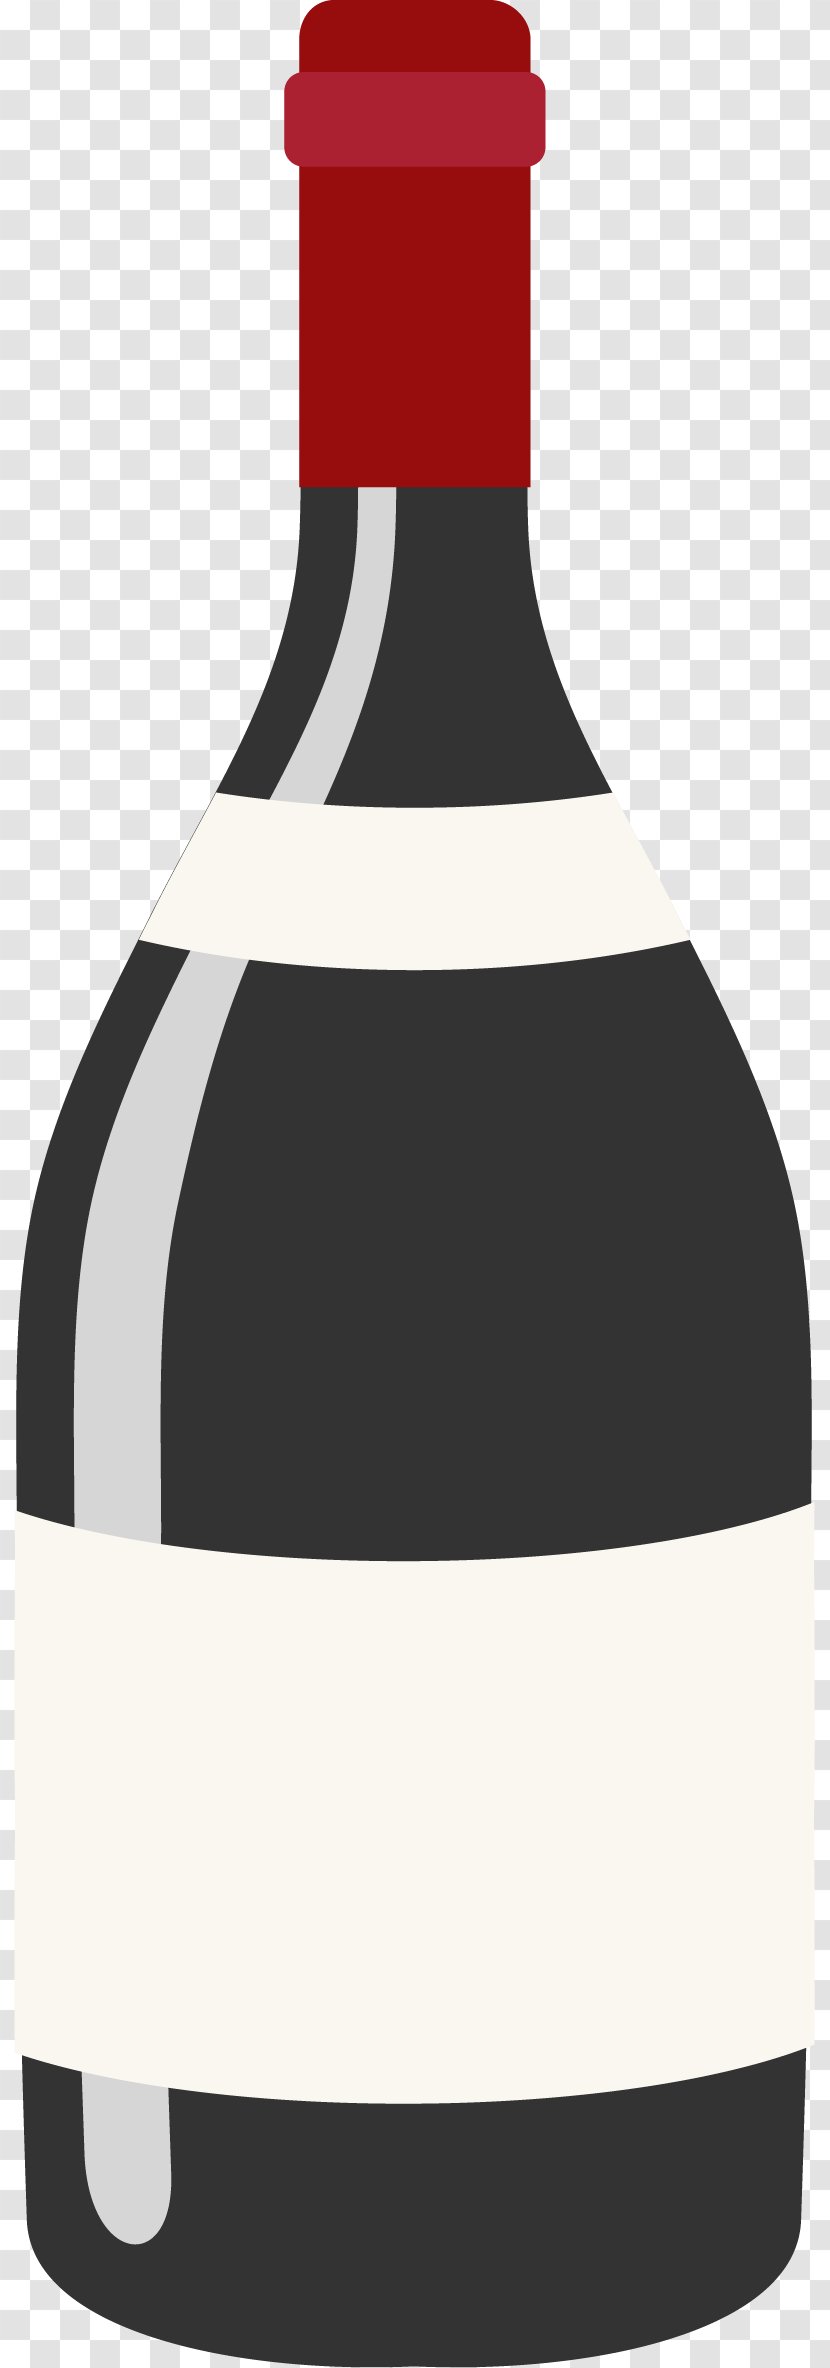 Red Wine Bottle Drawing - Animation - Cartoon Transparent PNG